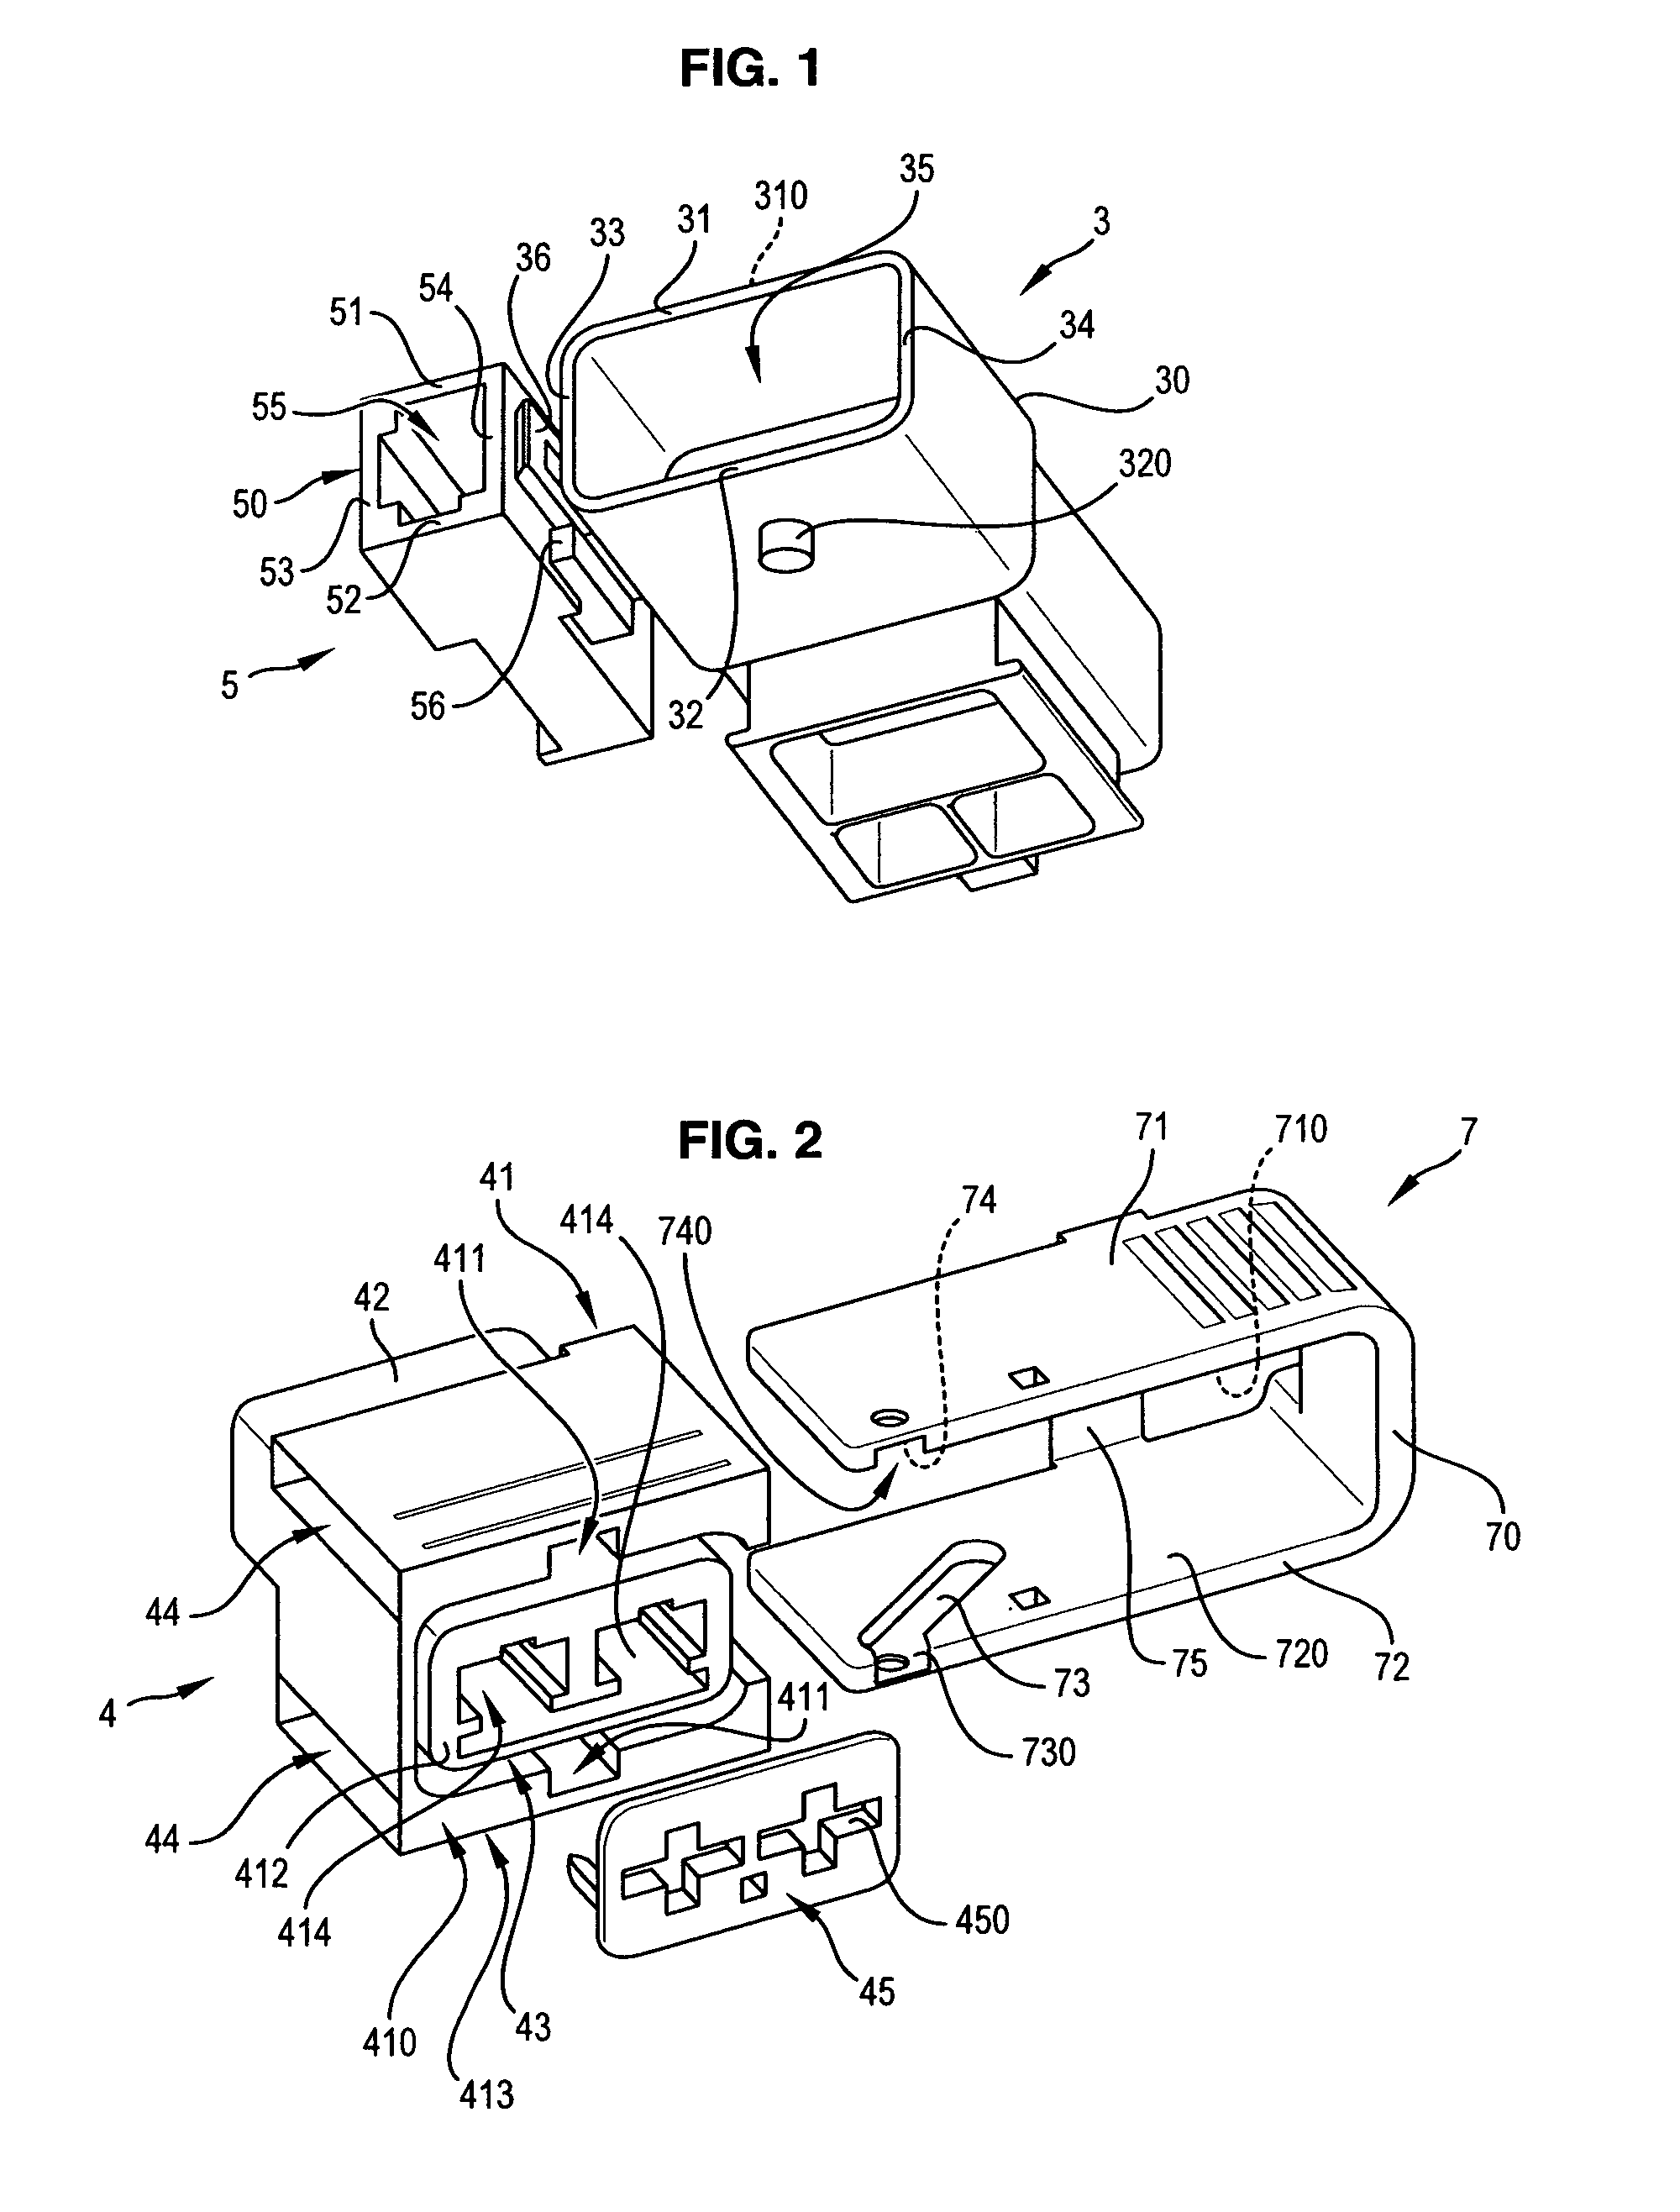 Electrical connector system with power and command connectors